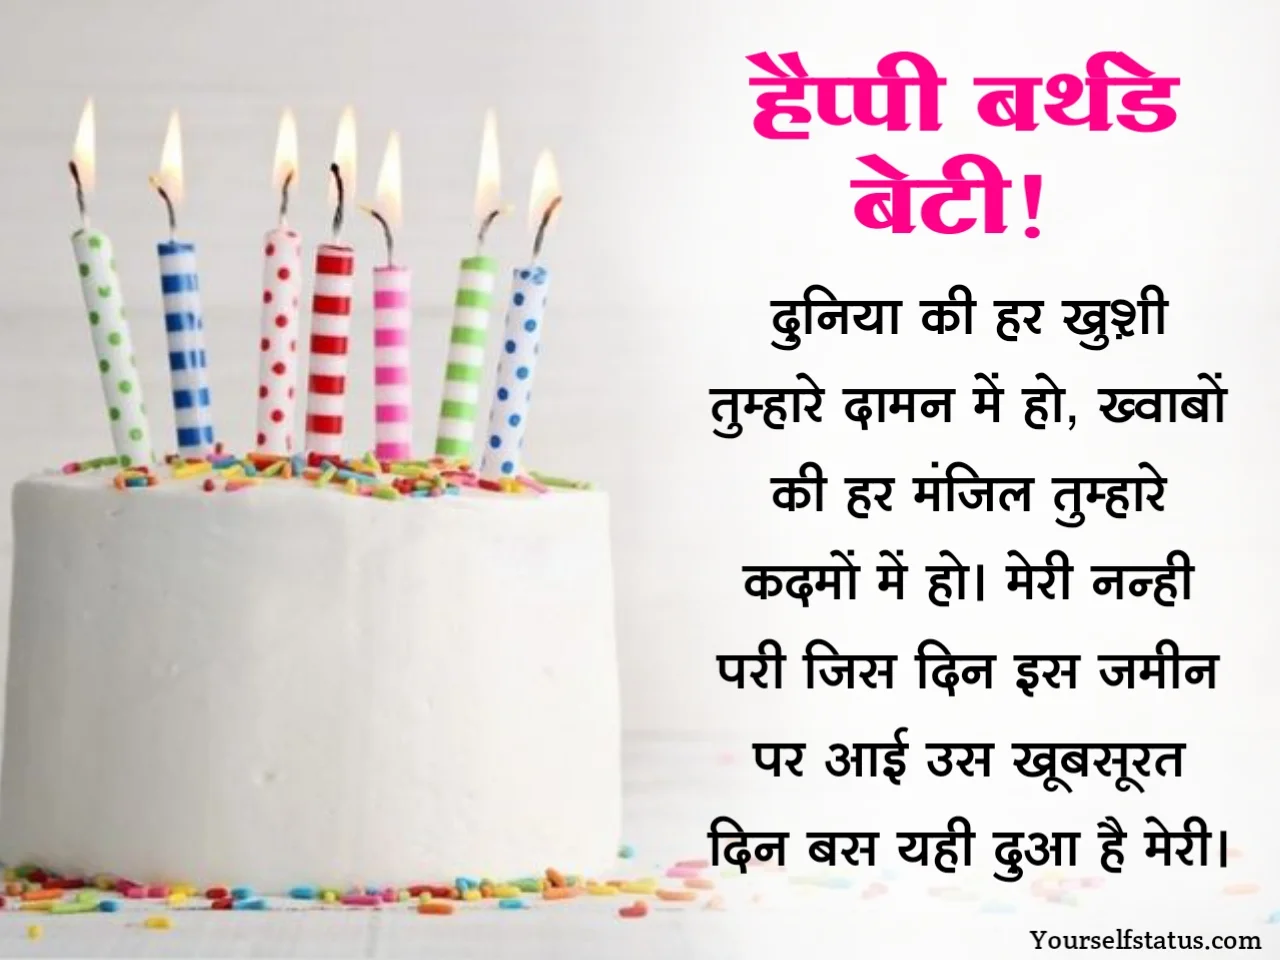 Happy Birthday images for daughter in hindi